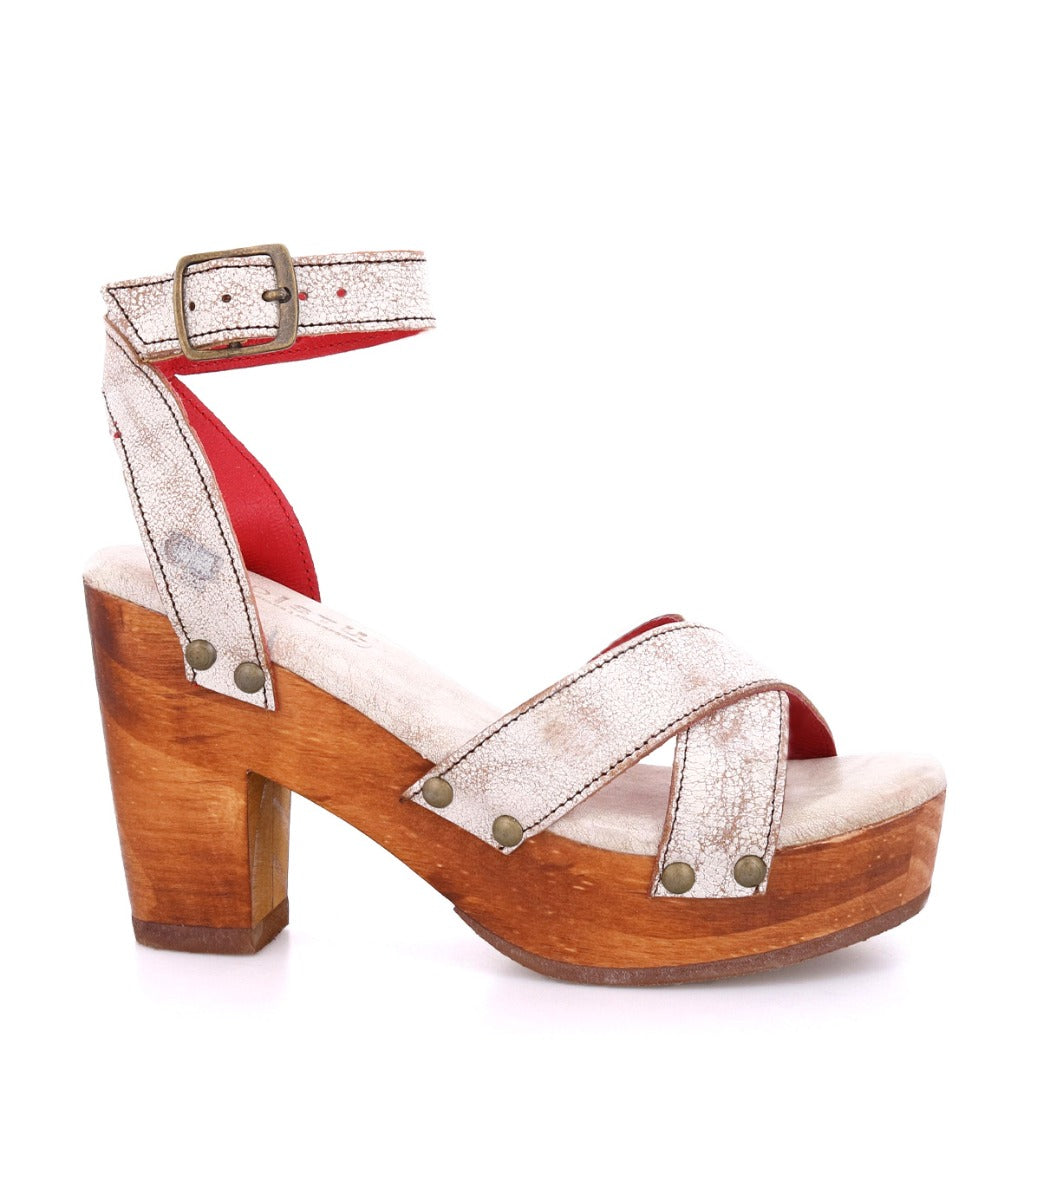 A women's white platform sandal with red straps called Kalah by Bed Stu.